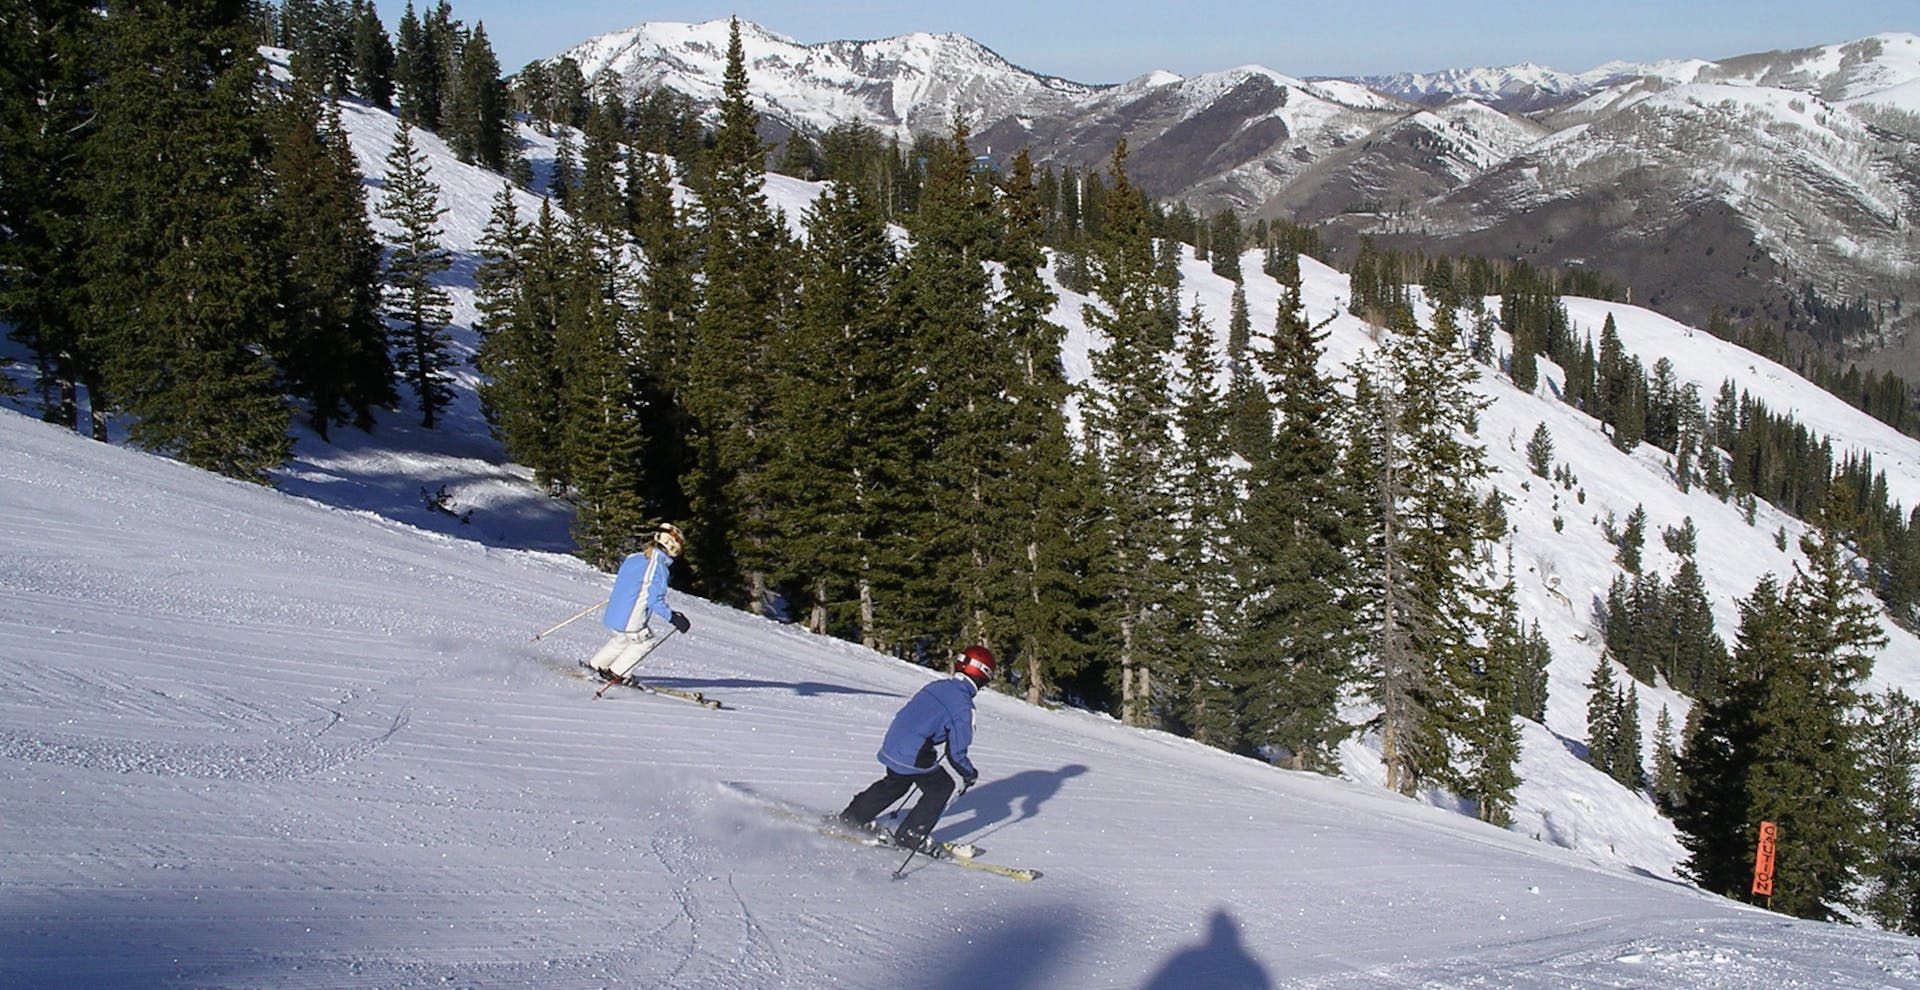 Skiing with family in Solitude Mountain Resort